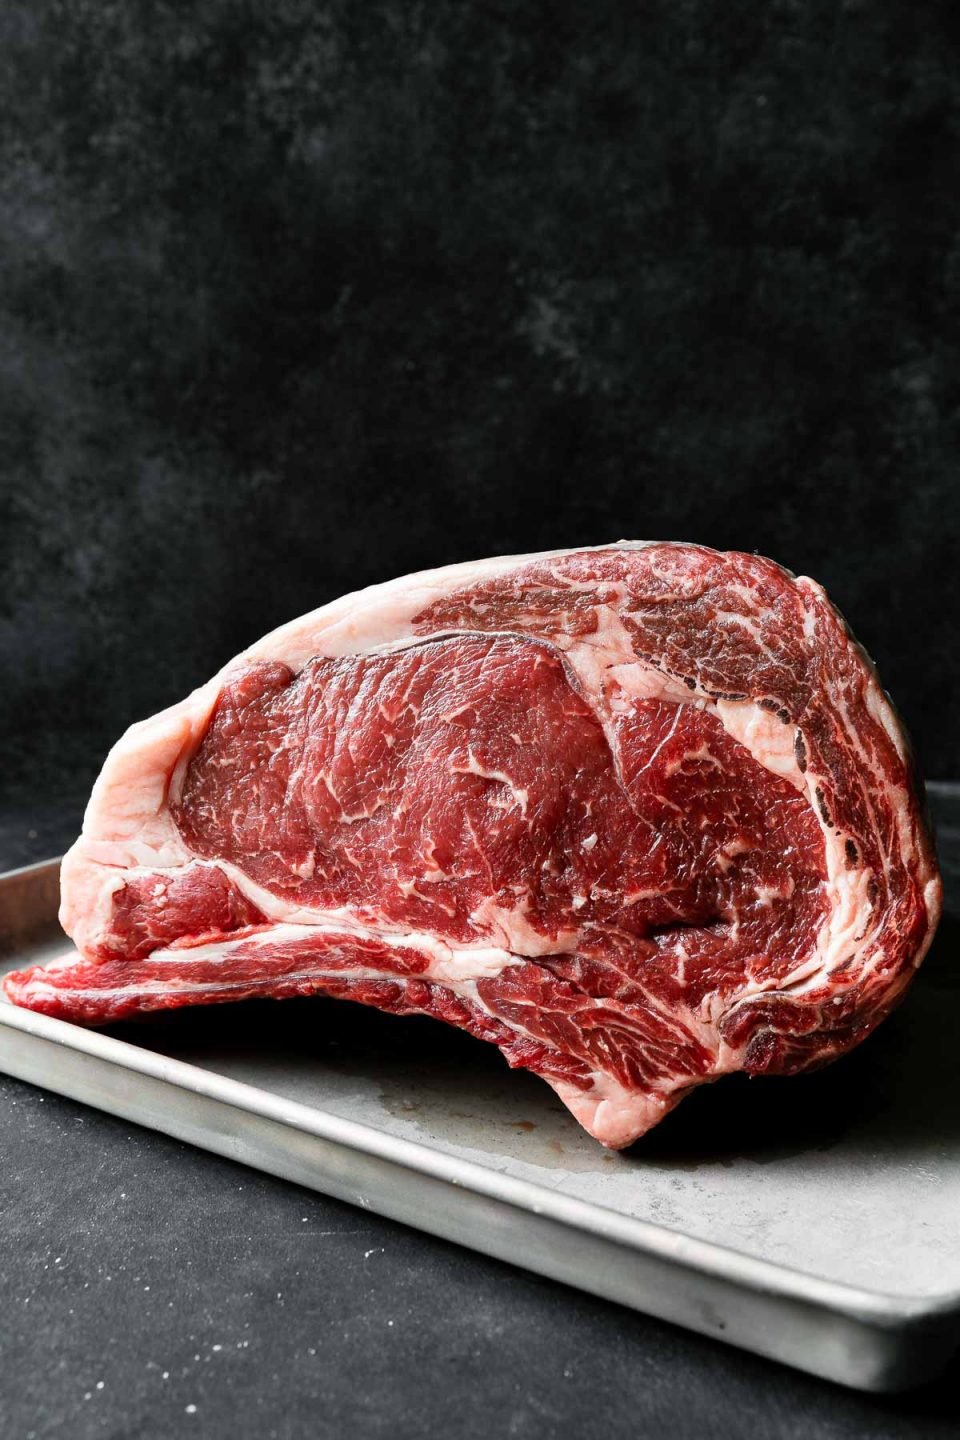 A side angle shot of a bone-in standing beef rib roast for prime rib sits atop an aluminum baking sheet. The baking sheet rests atop a dark textured surface with a dark textured background set behind it.